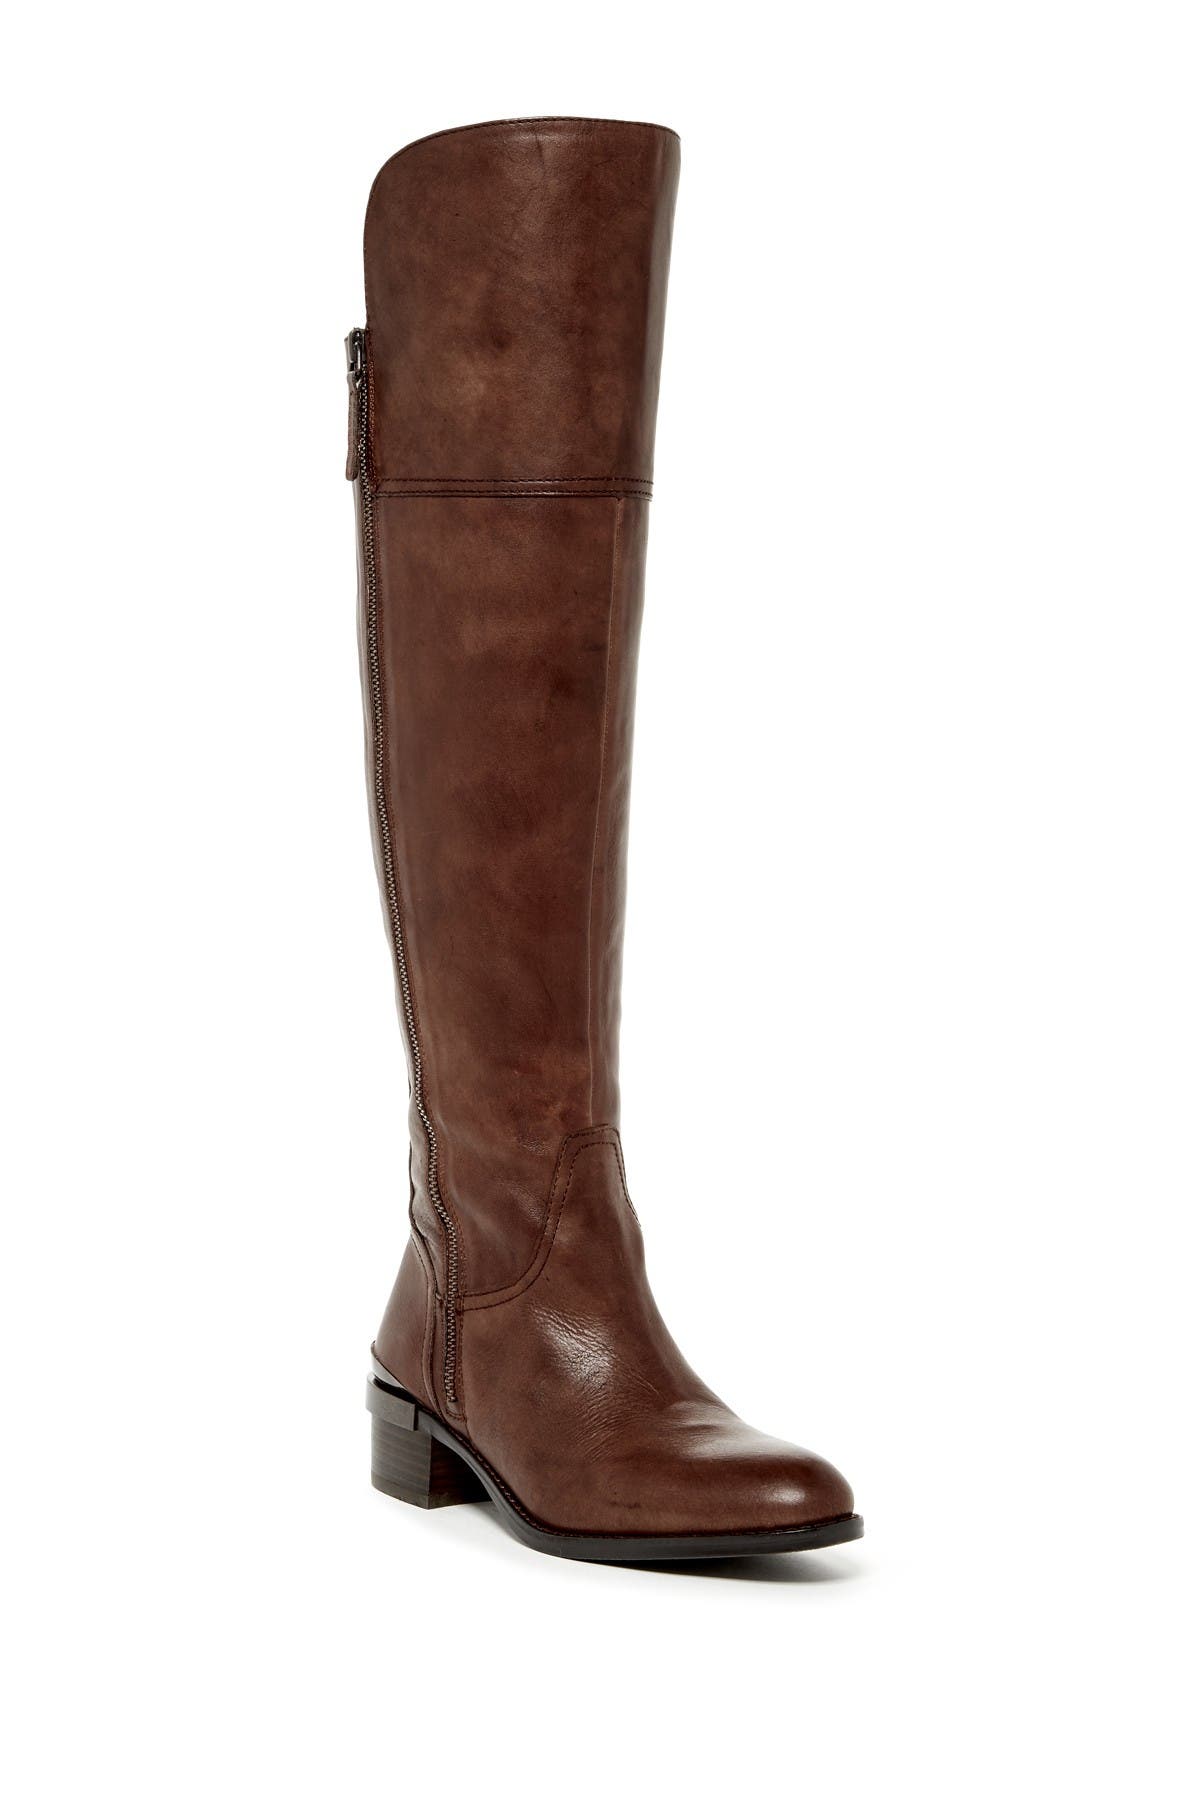 vince camuto boots nordstrom rack